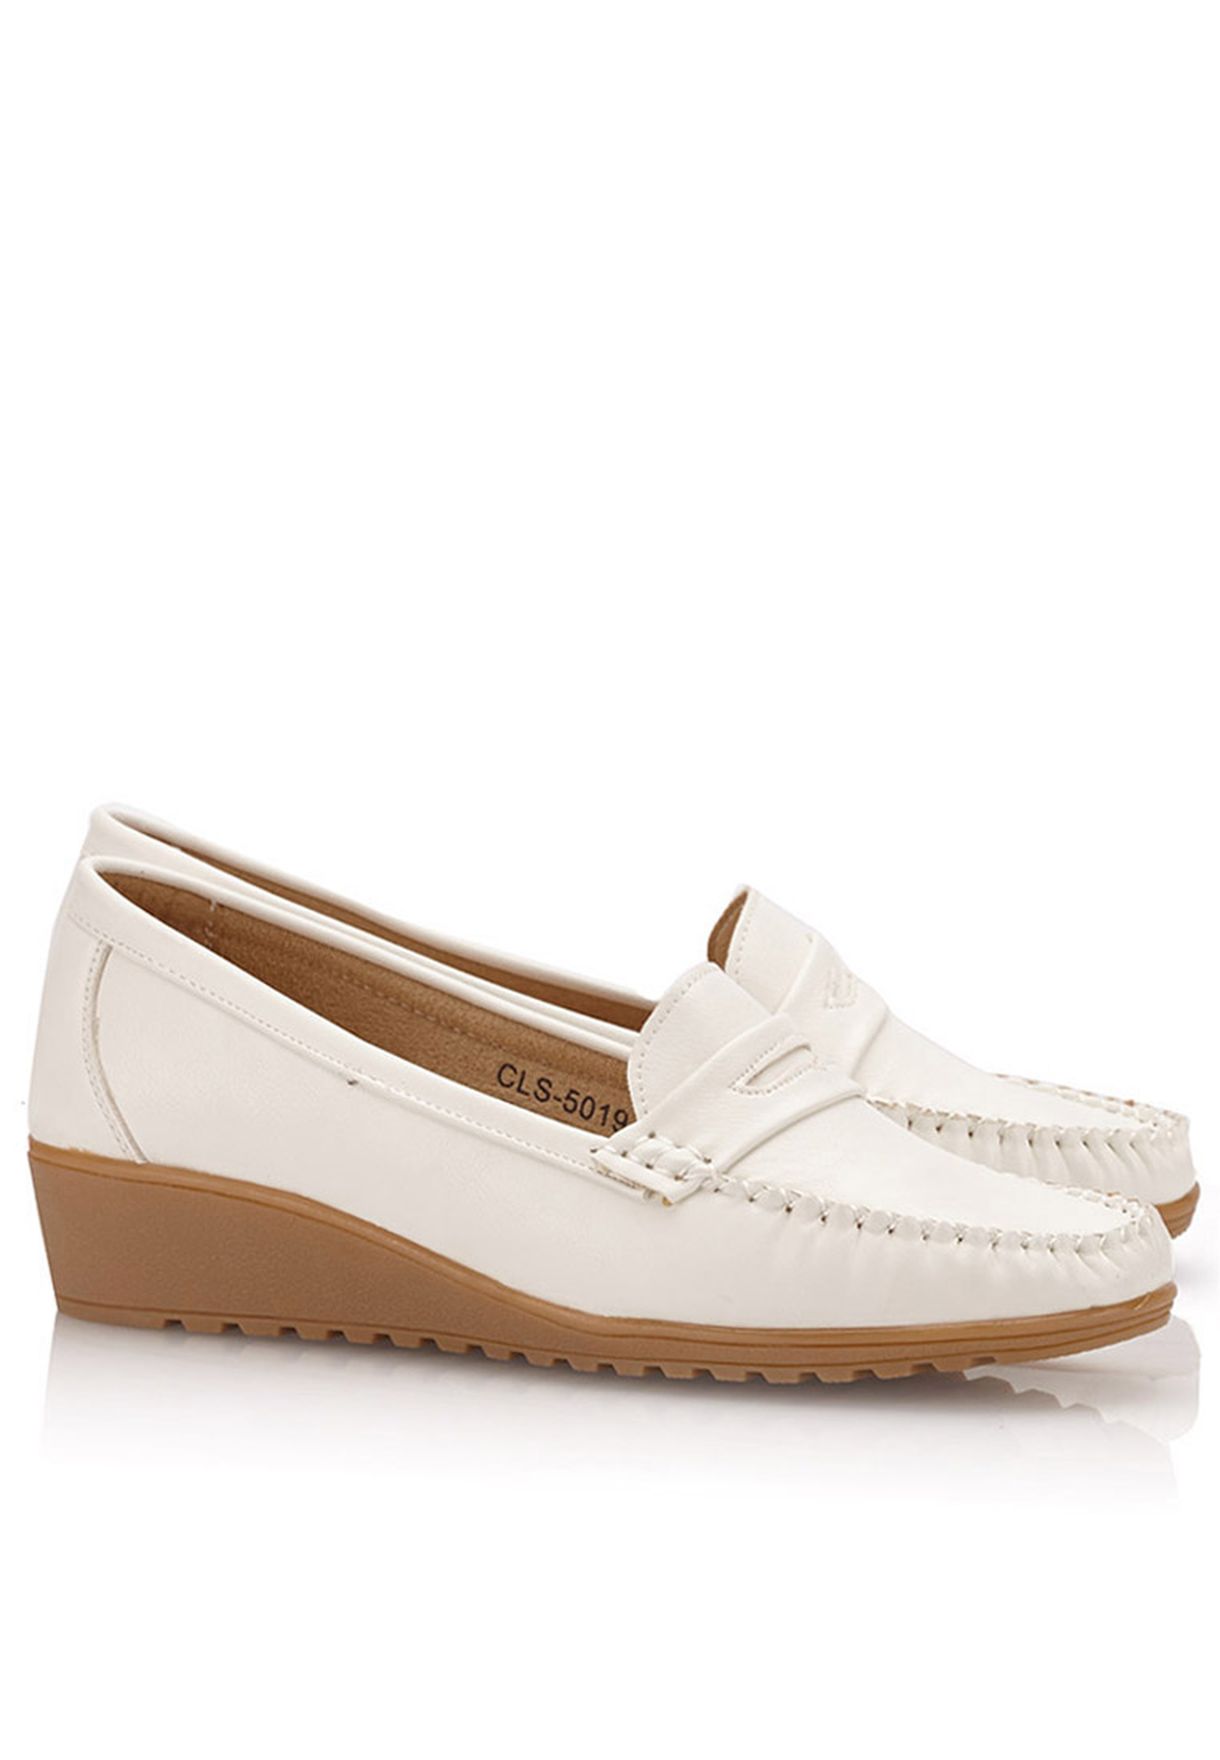 moccasins with wedge heel